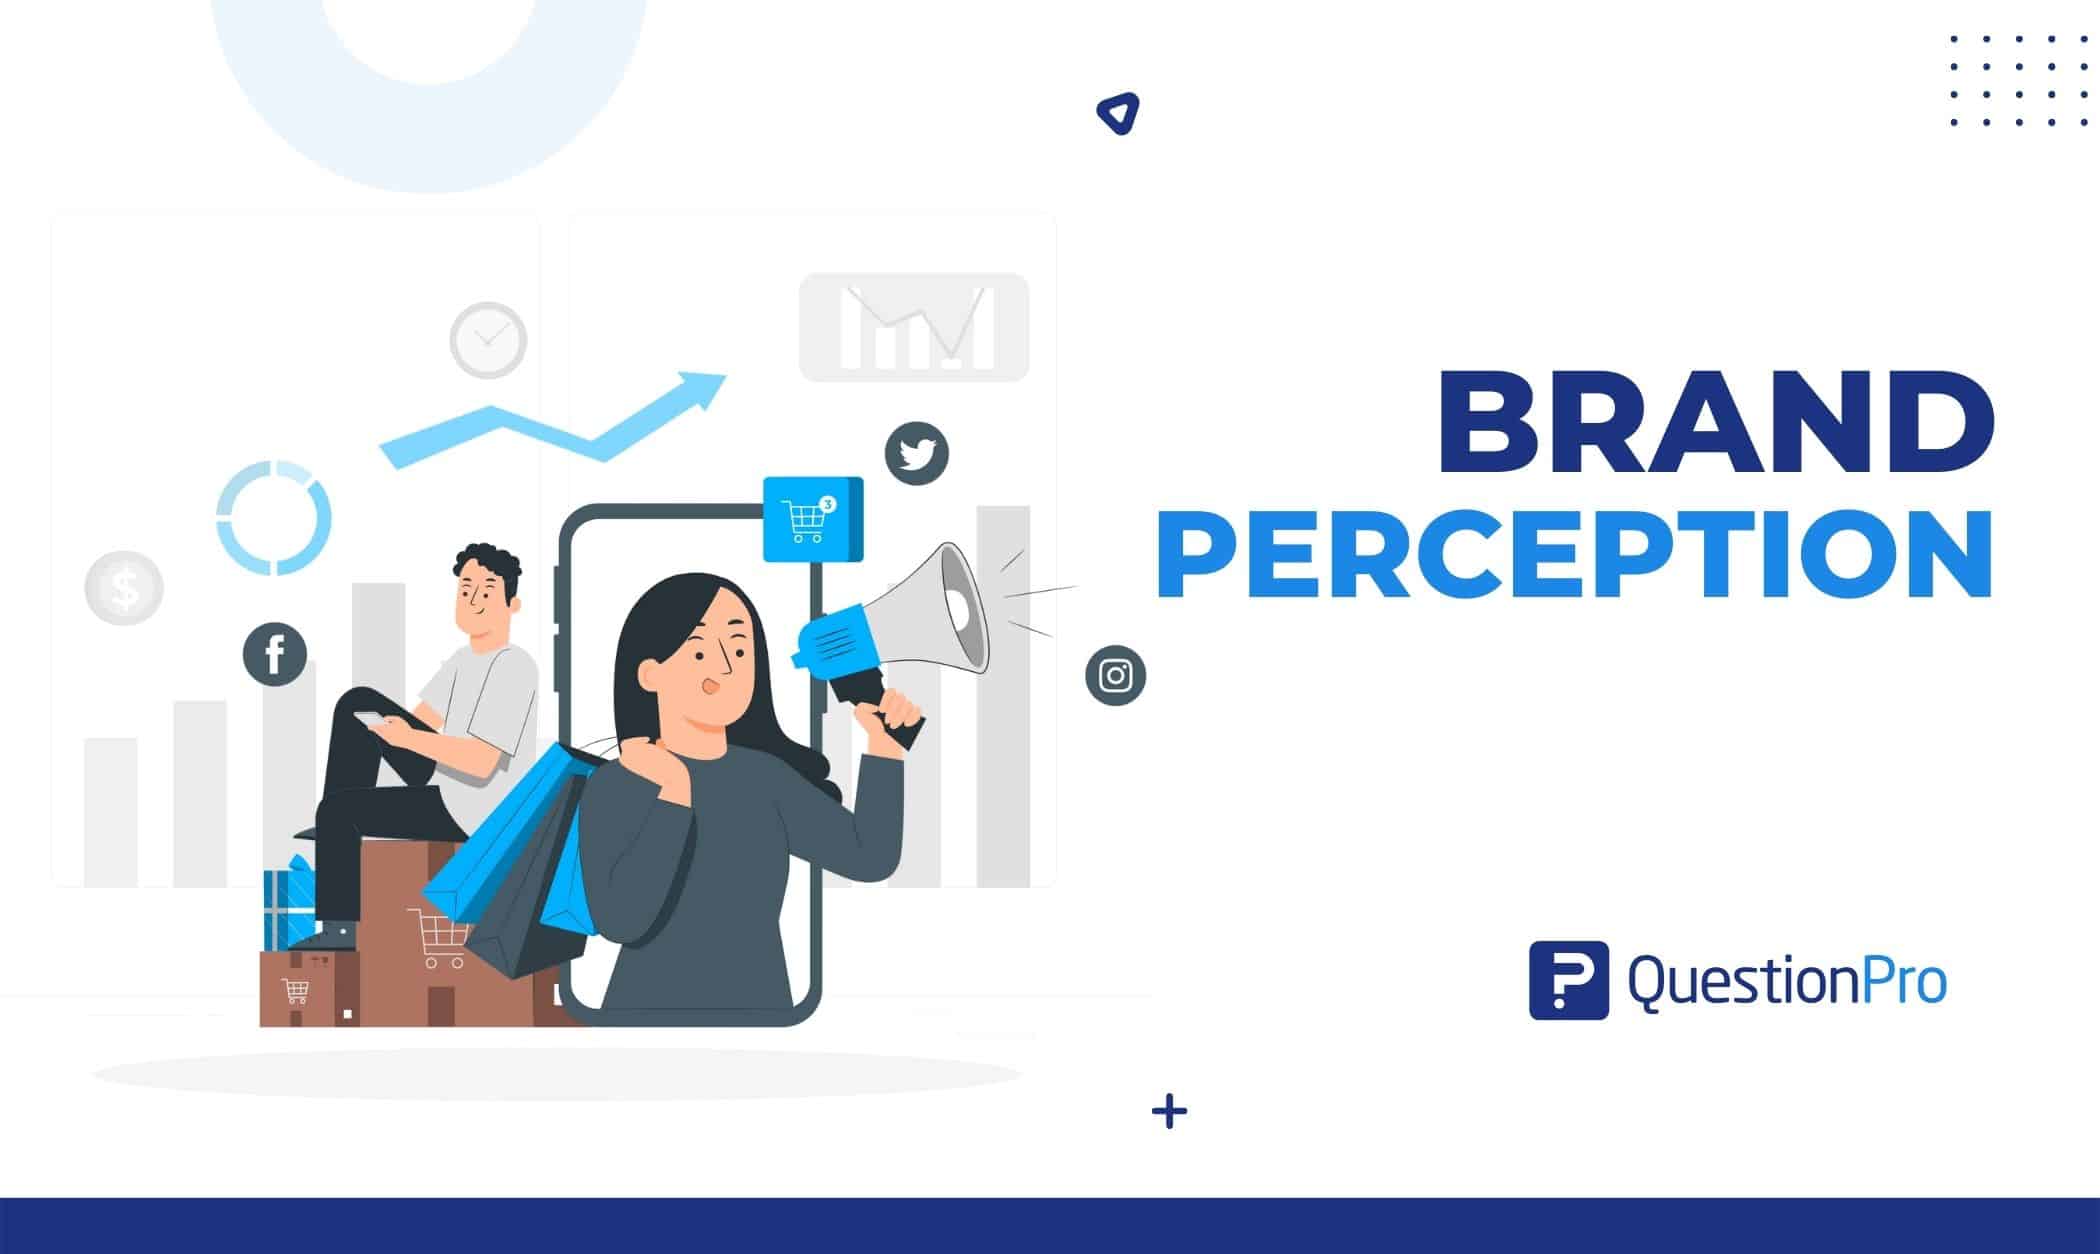 Brand perception helps determine where a product or service stands in the market and how well a company's advertising and marketing works.